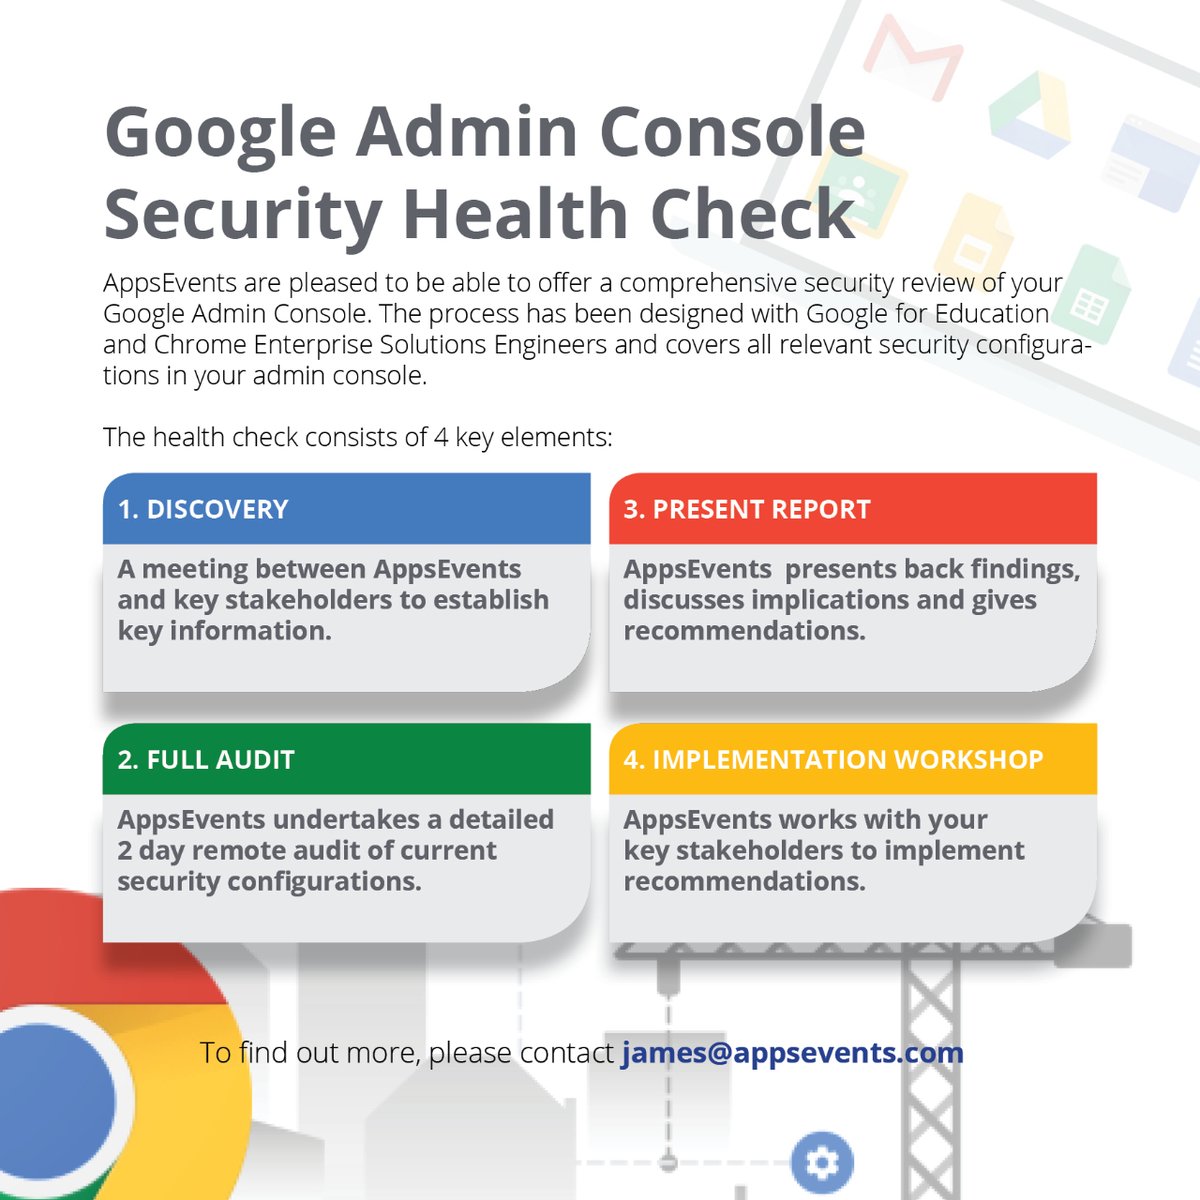 Our comprehensive security review of your Google Admin Console has been designed with Google for Education and Chrome Enterprise Solutions Engineers and covers all relevant security configurations in your admin console.   To find out more, please contact @JamesDSayer